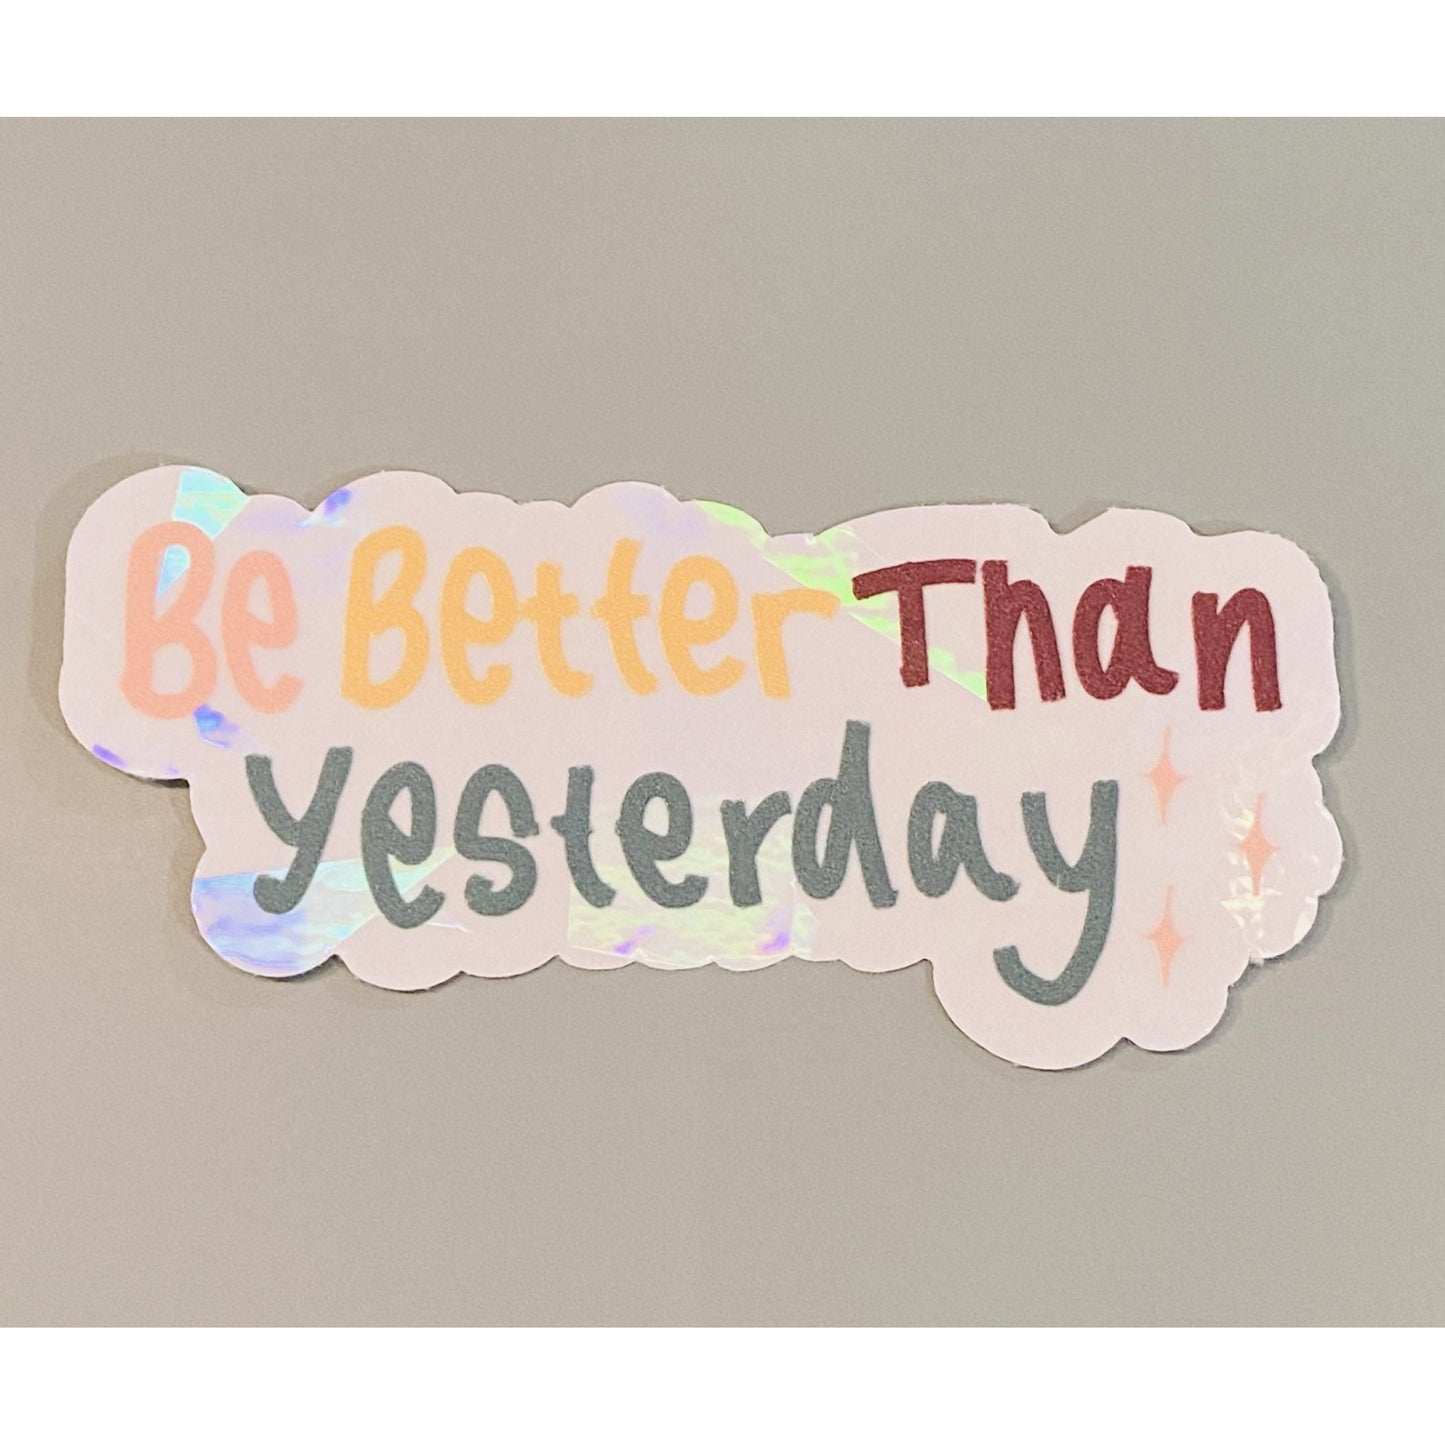 Be Better Than Yesterday Sun Catcher_Sol Candles & Scents_Maddie Green